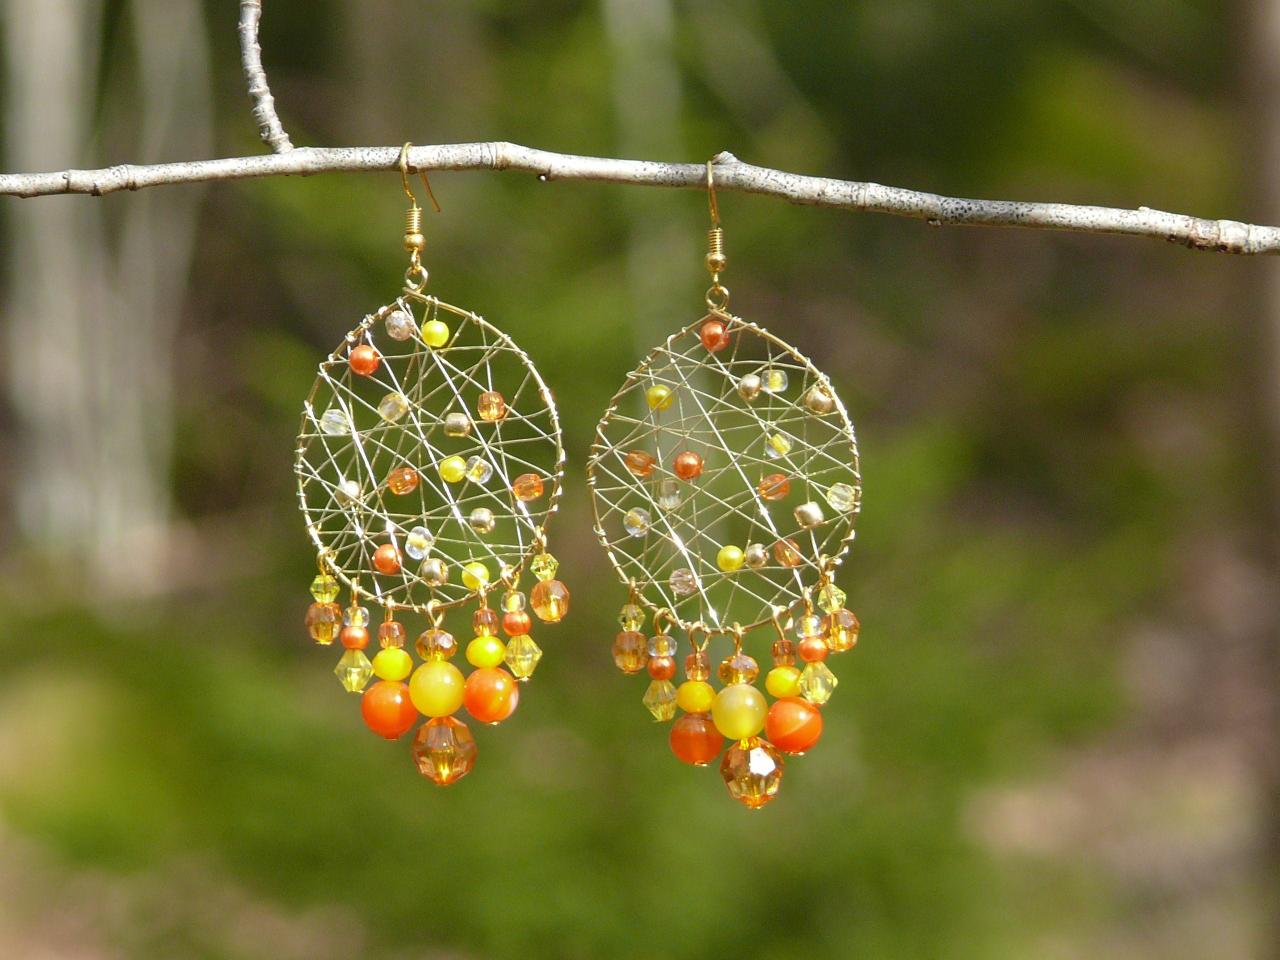 Yellow Orange Statement Earrings, Wire Wrapped Chandelier Earrings With Yellow Beads, Large Gold Hoops With Dangles, Orange Boho Earrings